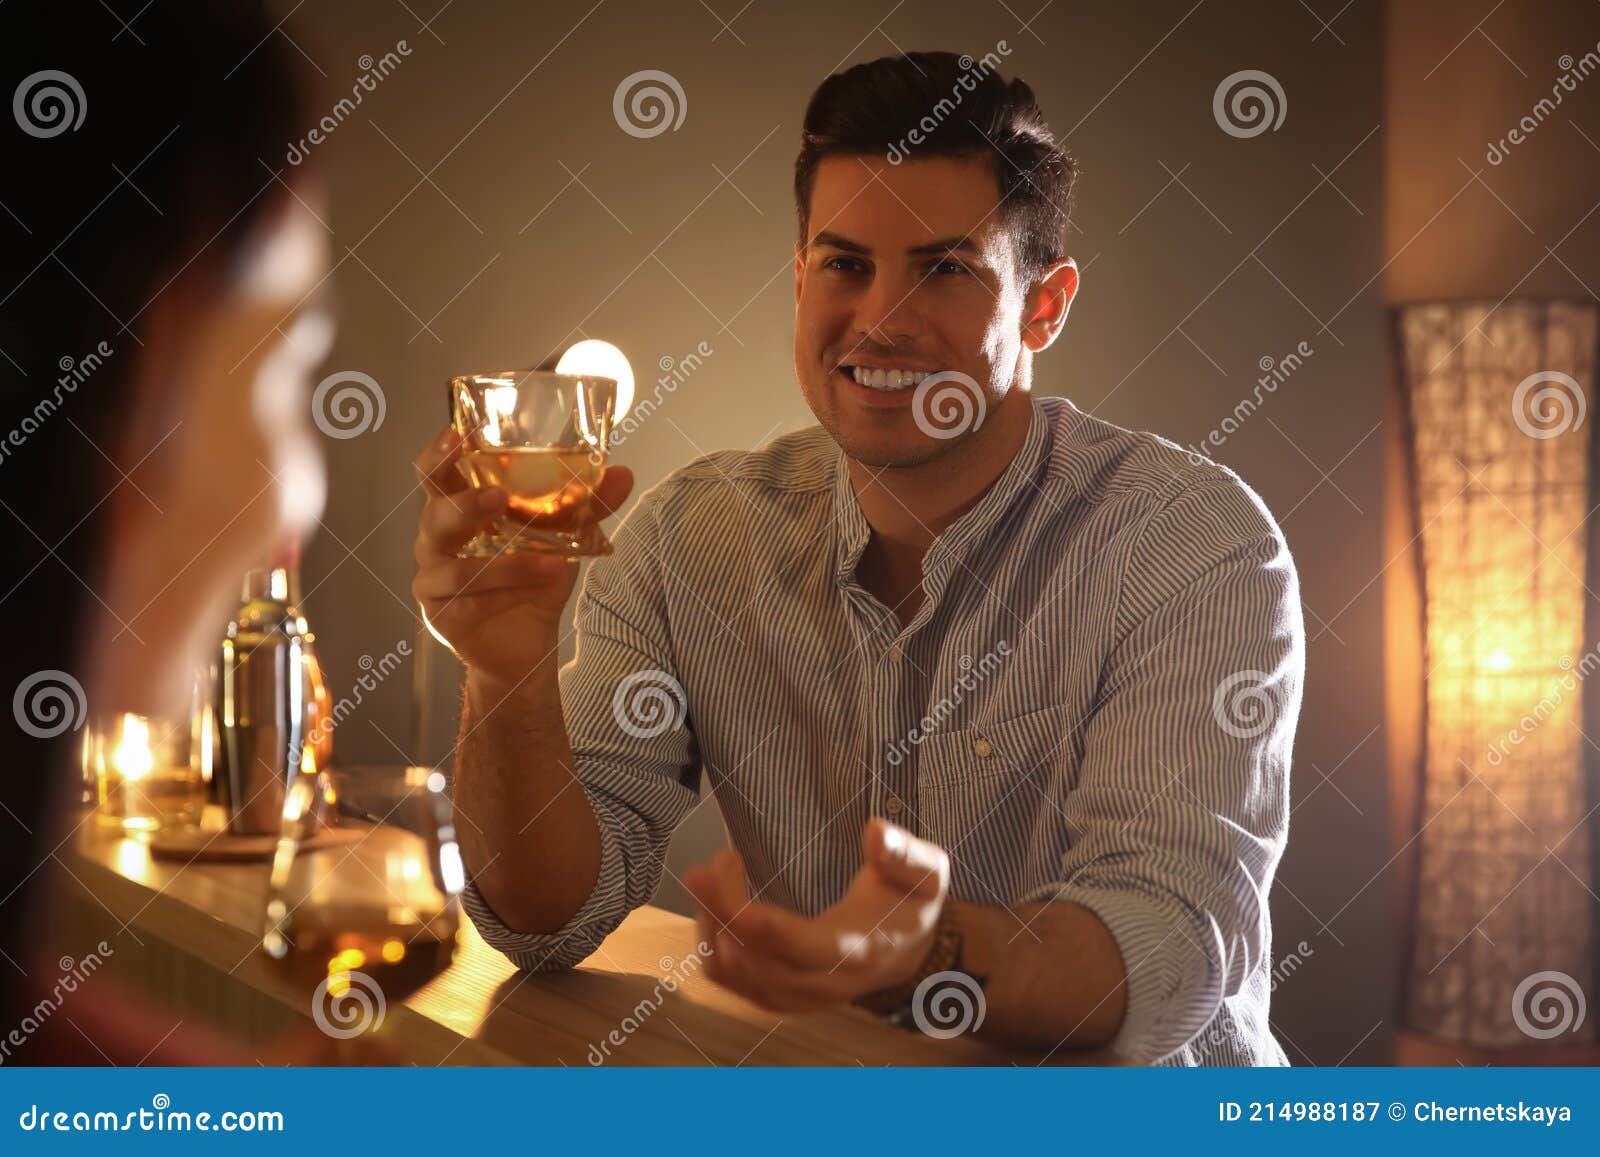 man and woman flirting with each other in bar